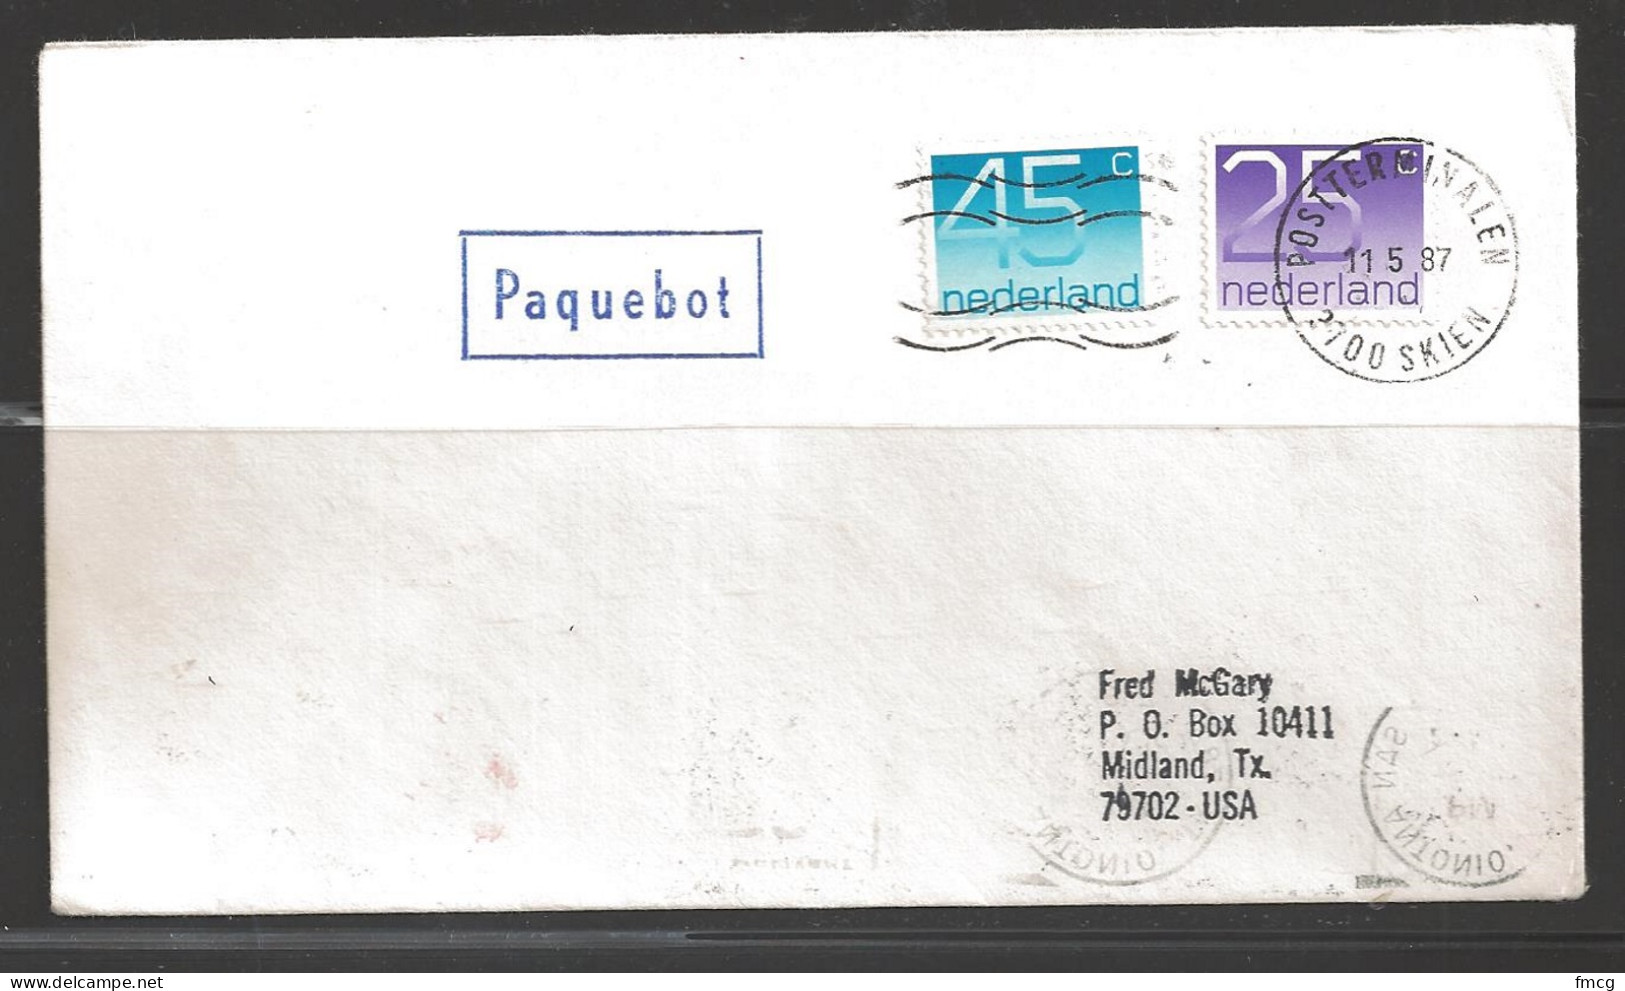 1987 Paquebot Cover, Netherlands Stamp Used In Skien, Norway, Postmarked 11.5.87 - Lettres & Documents